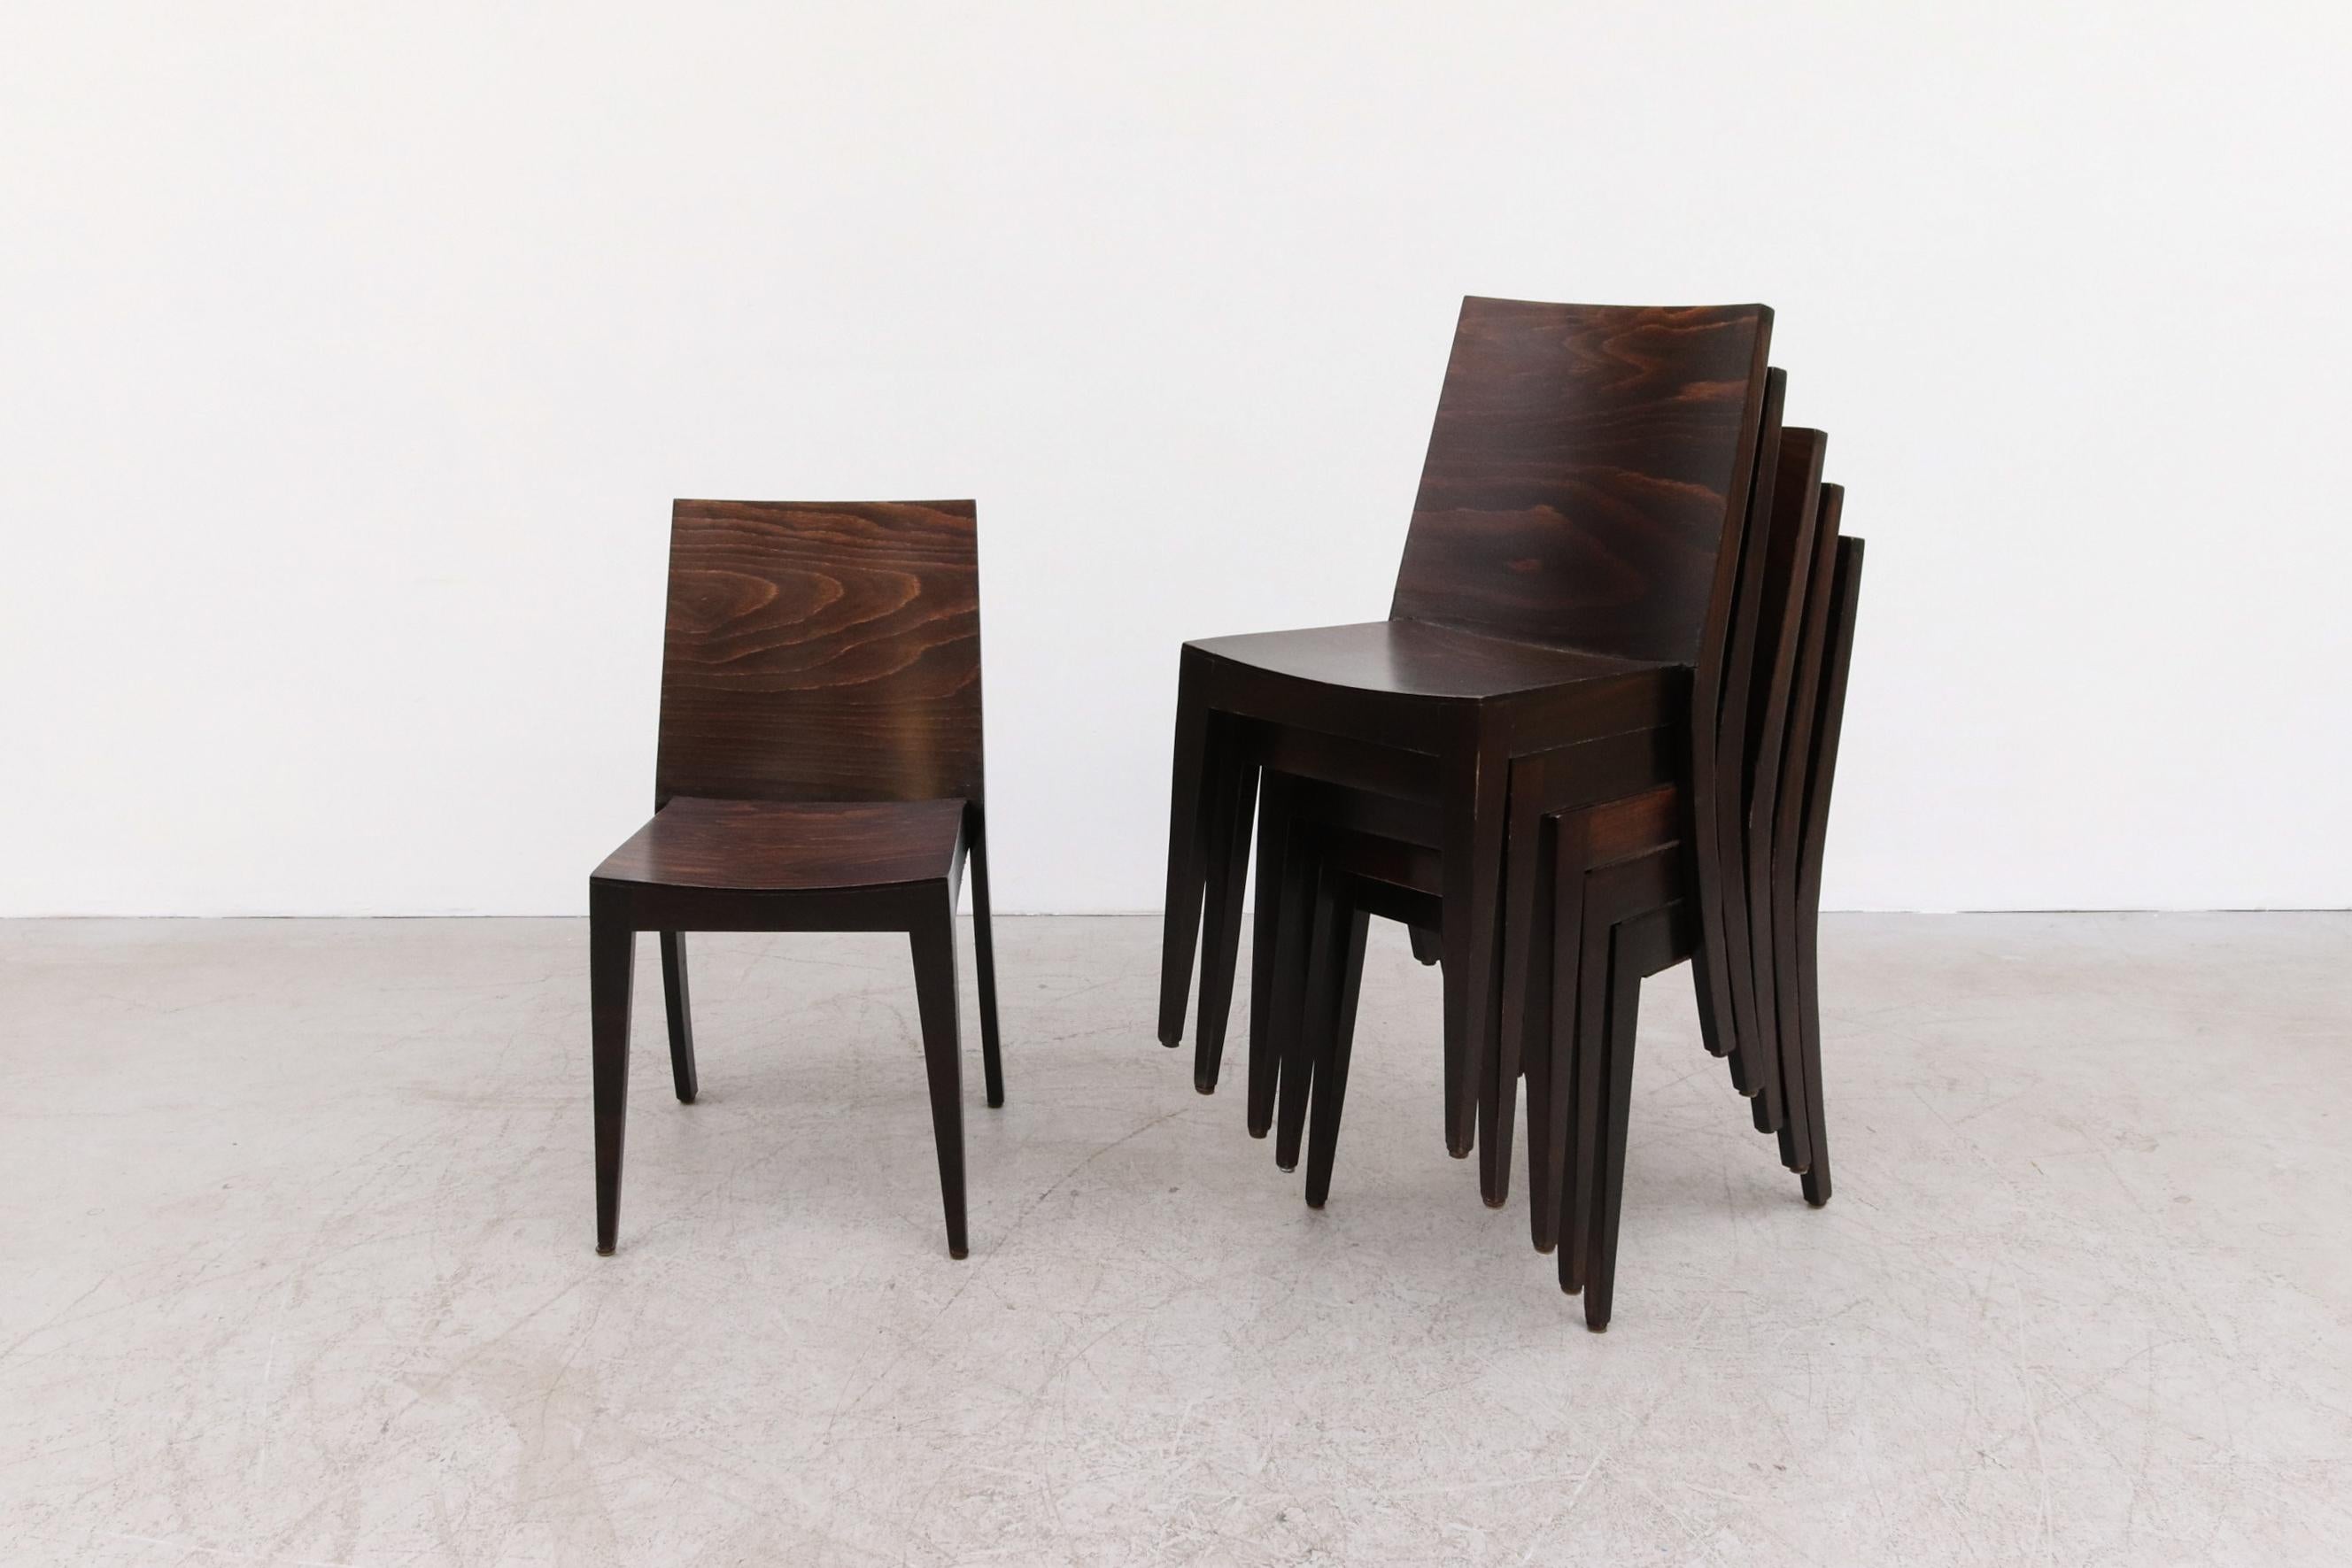 Philippe Starck Style Dark Stained Wood Stacking Chairs. Great architectural lines. In original condition with visible wear, including minor scratches and chips, consistent with age and use. Also available in a natural blonde version